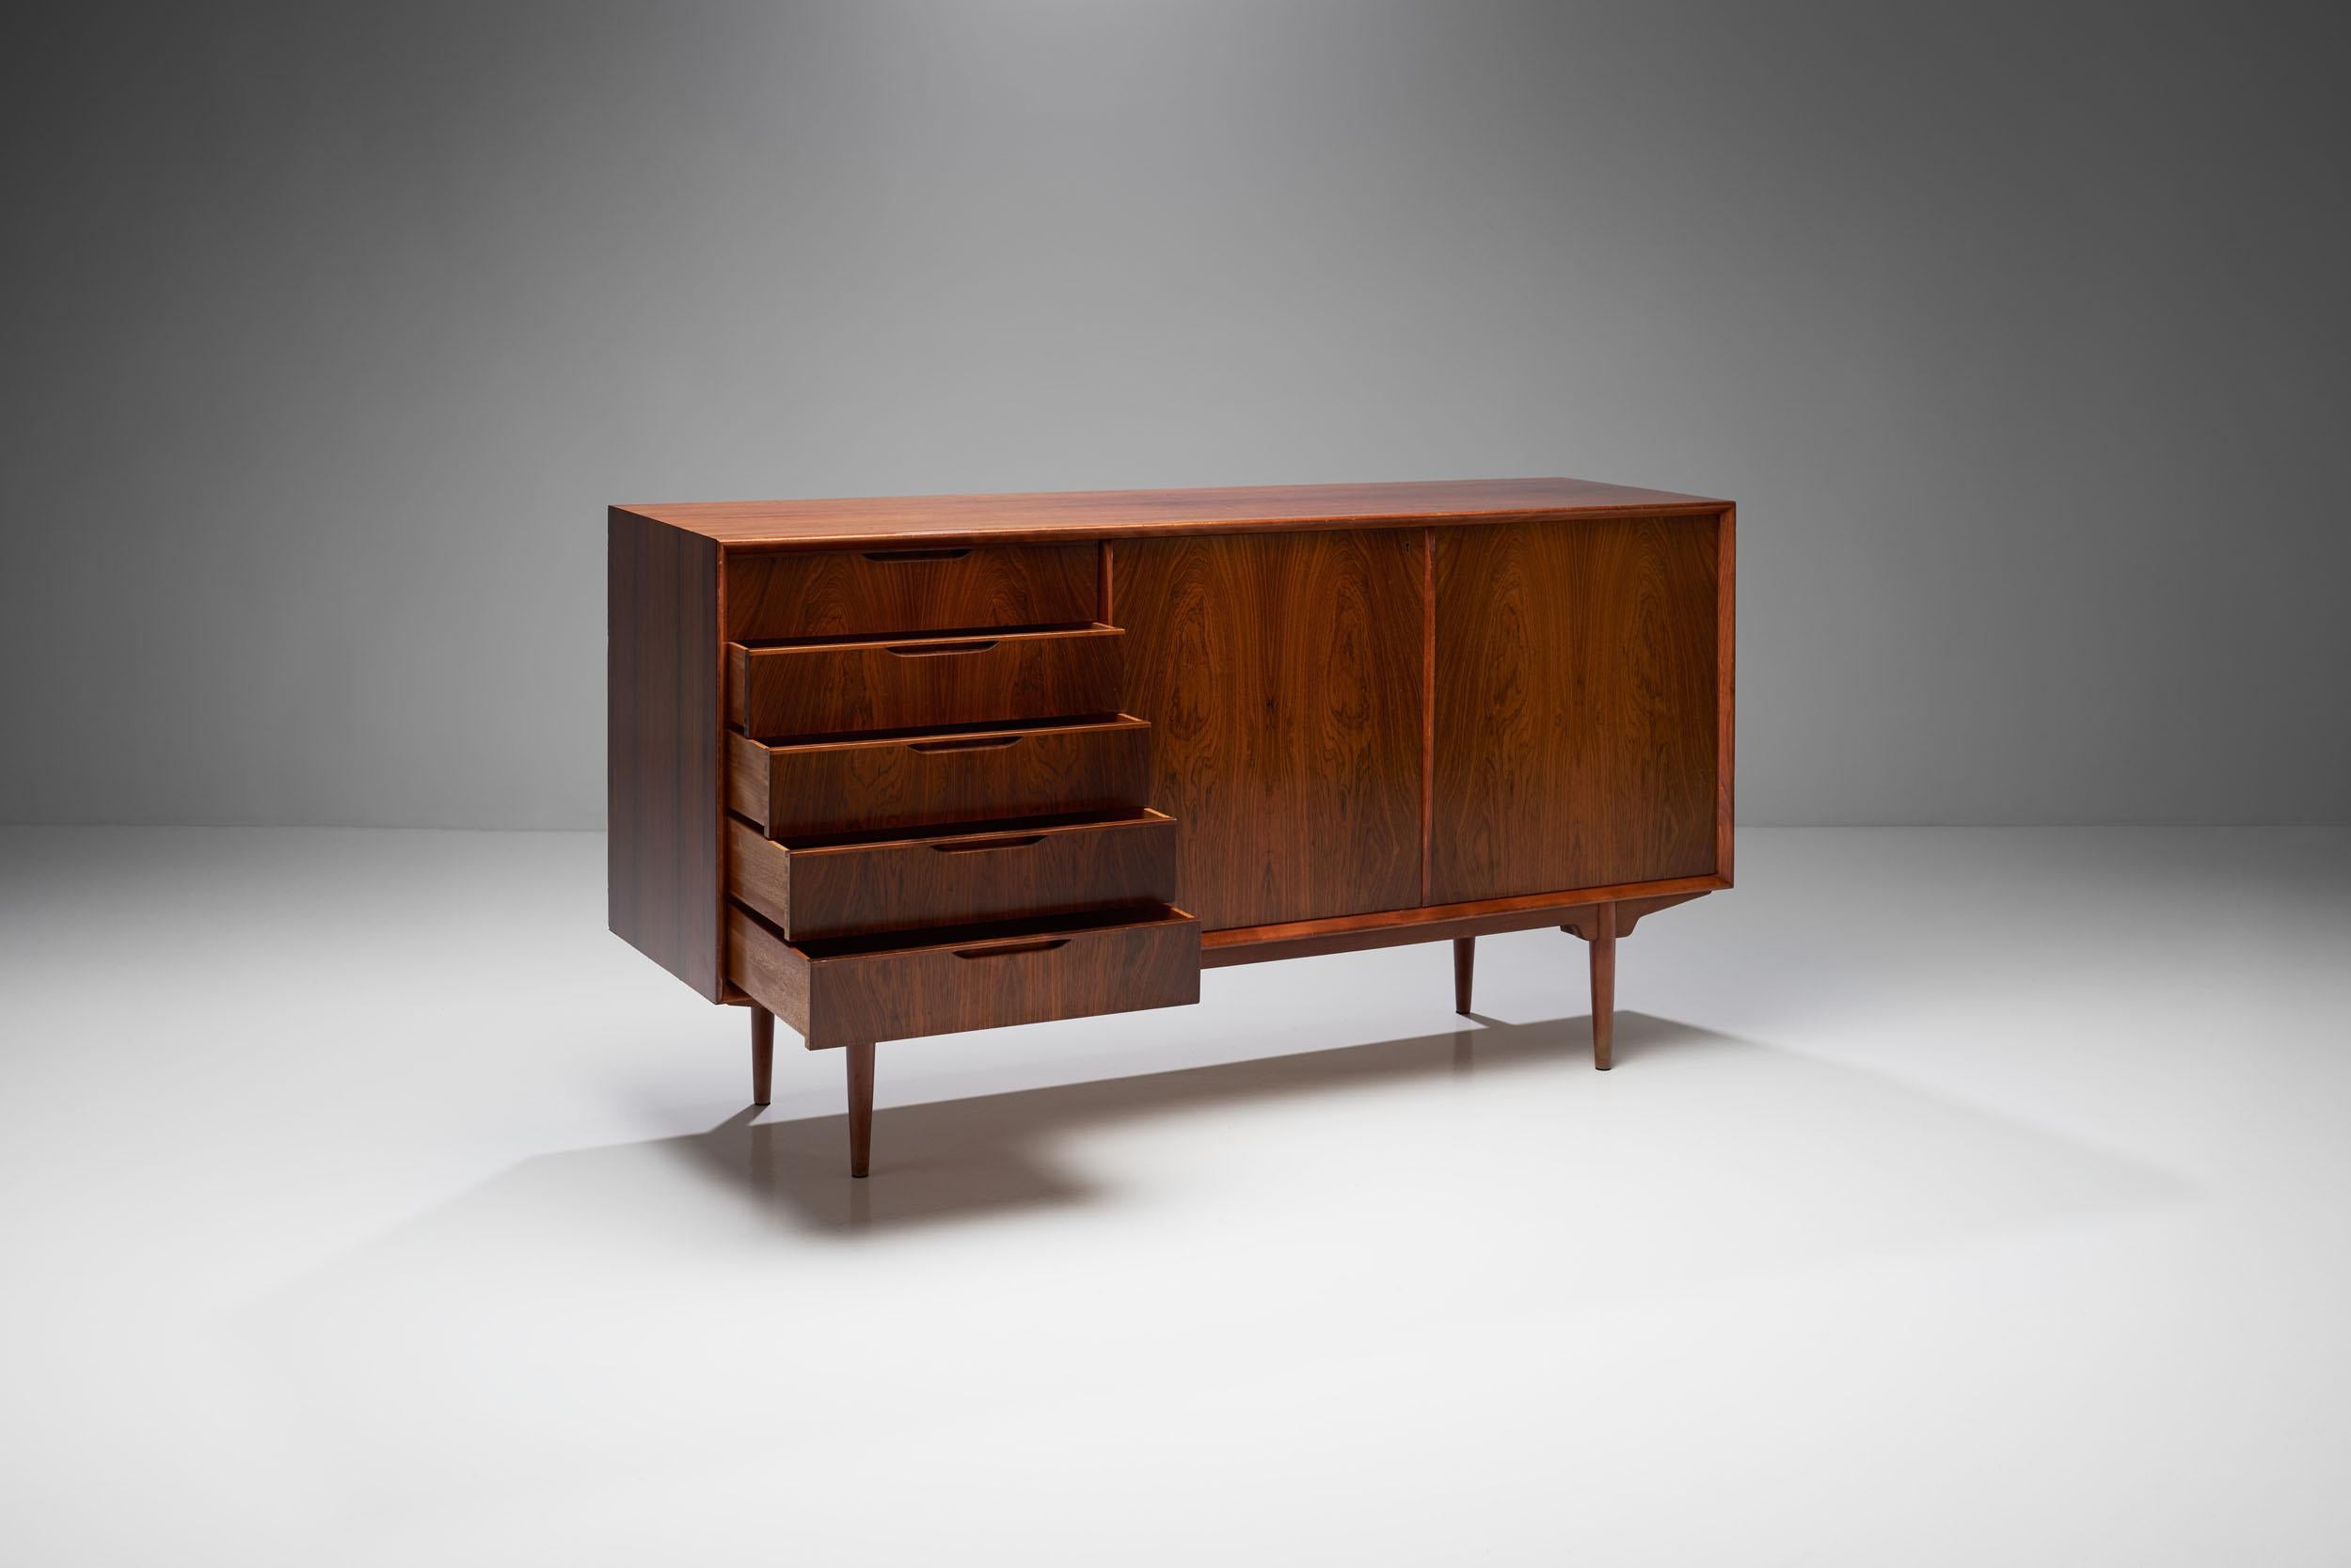 A Svante Skogh “Silvia” sideboard with two sliding doors and five drawers, produced by AB Seffle Möbelfabrik. 

This sideboard features a practical design with its sliding doors and drawers, paired with wooden material. It features sleek and